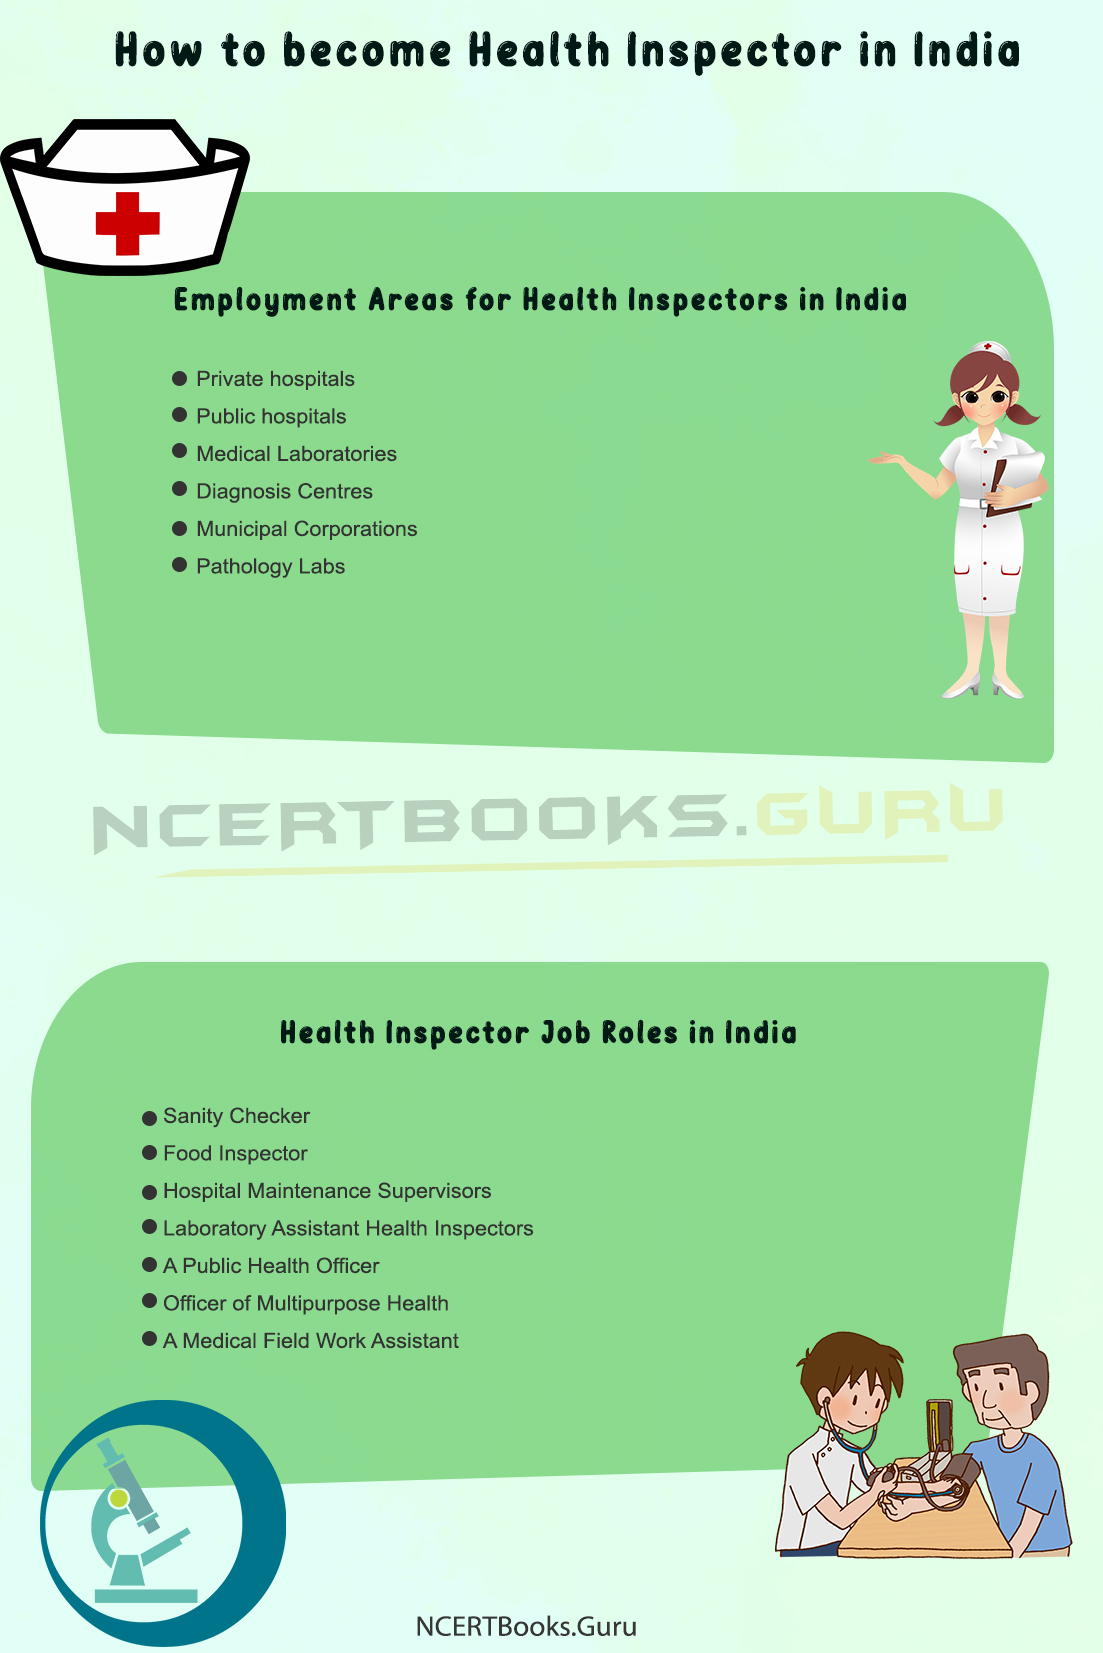 How to become Health Inspector in India